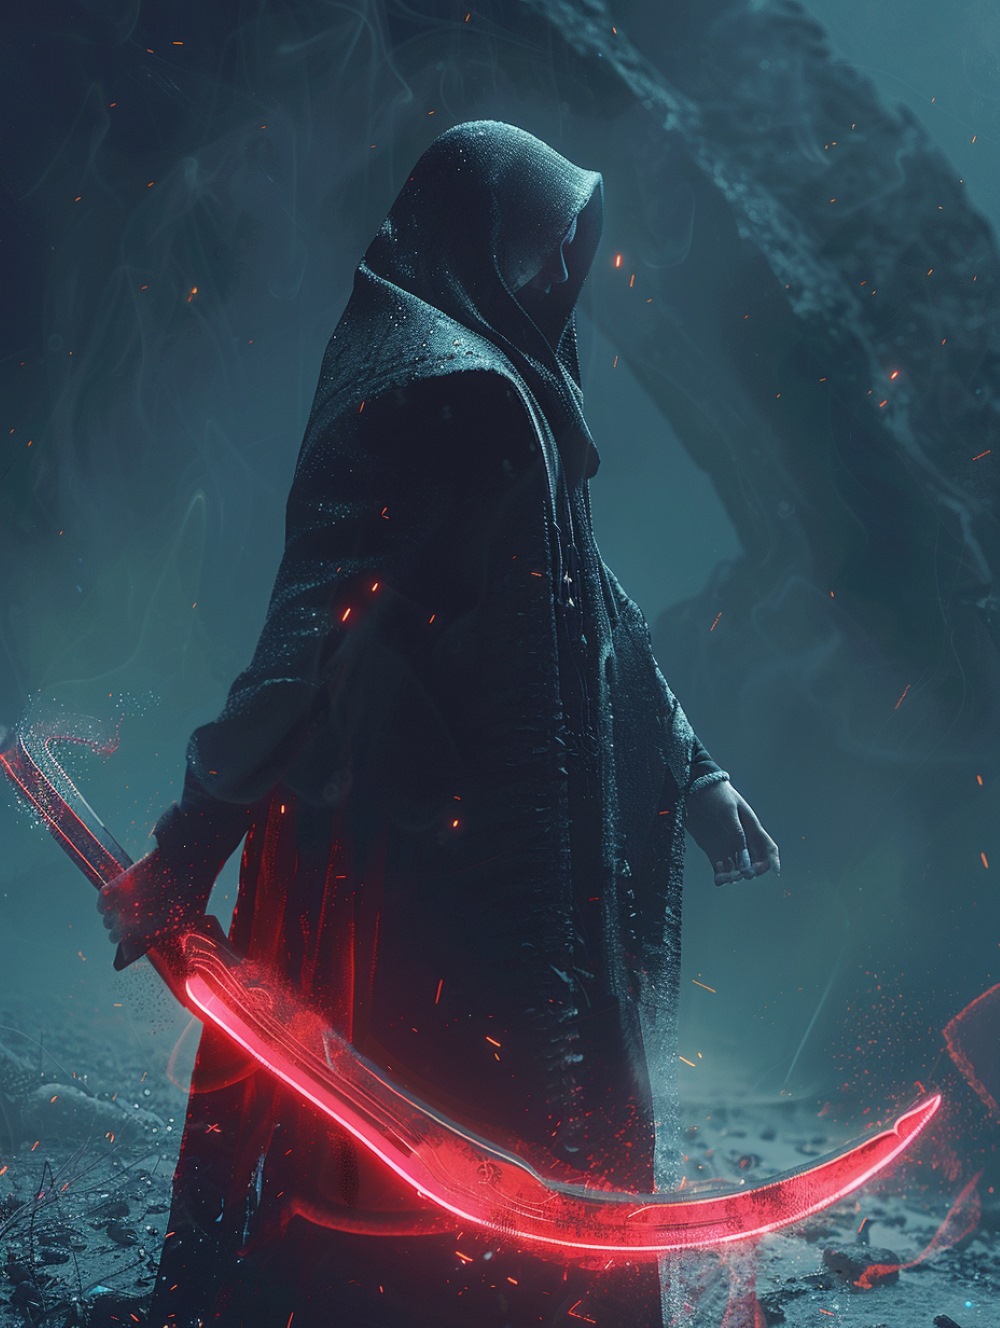 Darth Noctyss and her sickle-shaped lightsaber